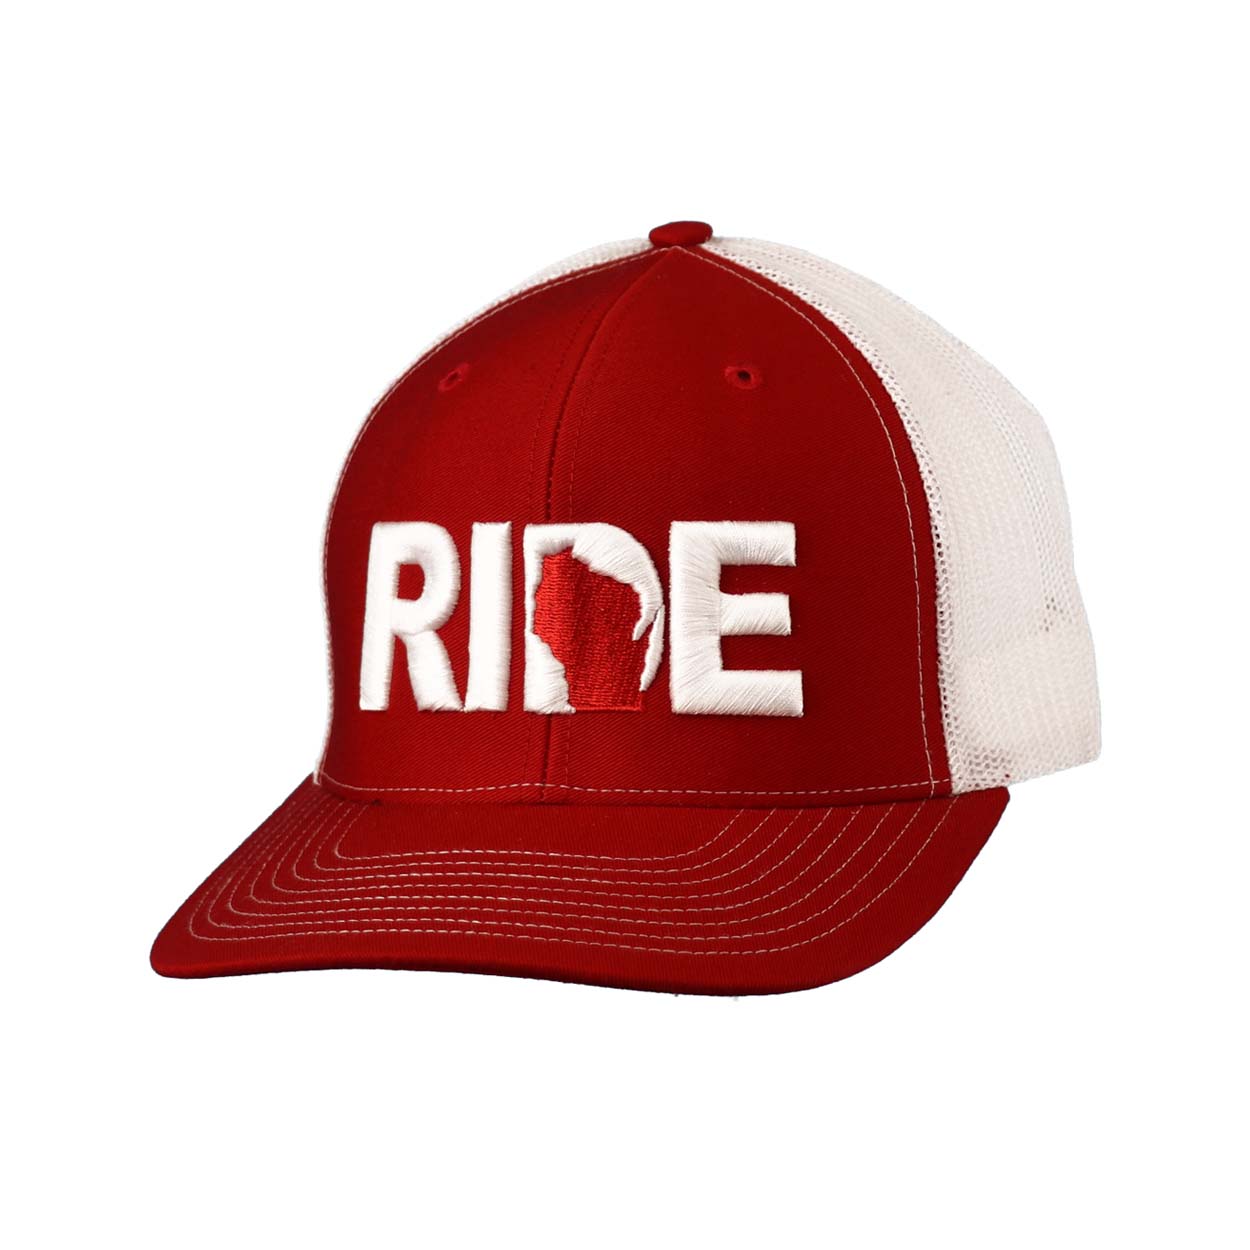 Ride Wisconsin Classic Embroidered Snapback Trucker Hat Red/White